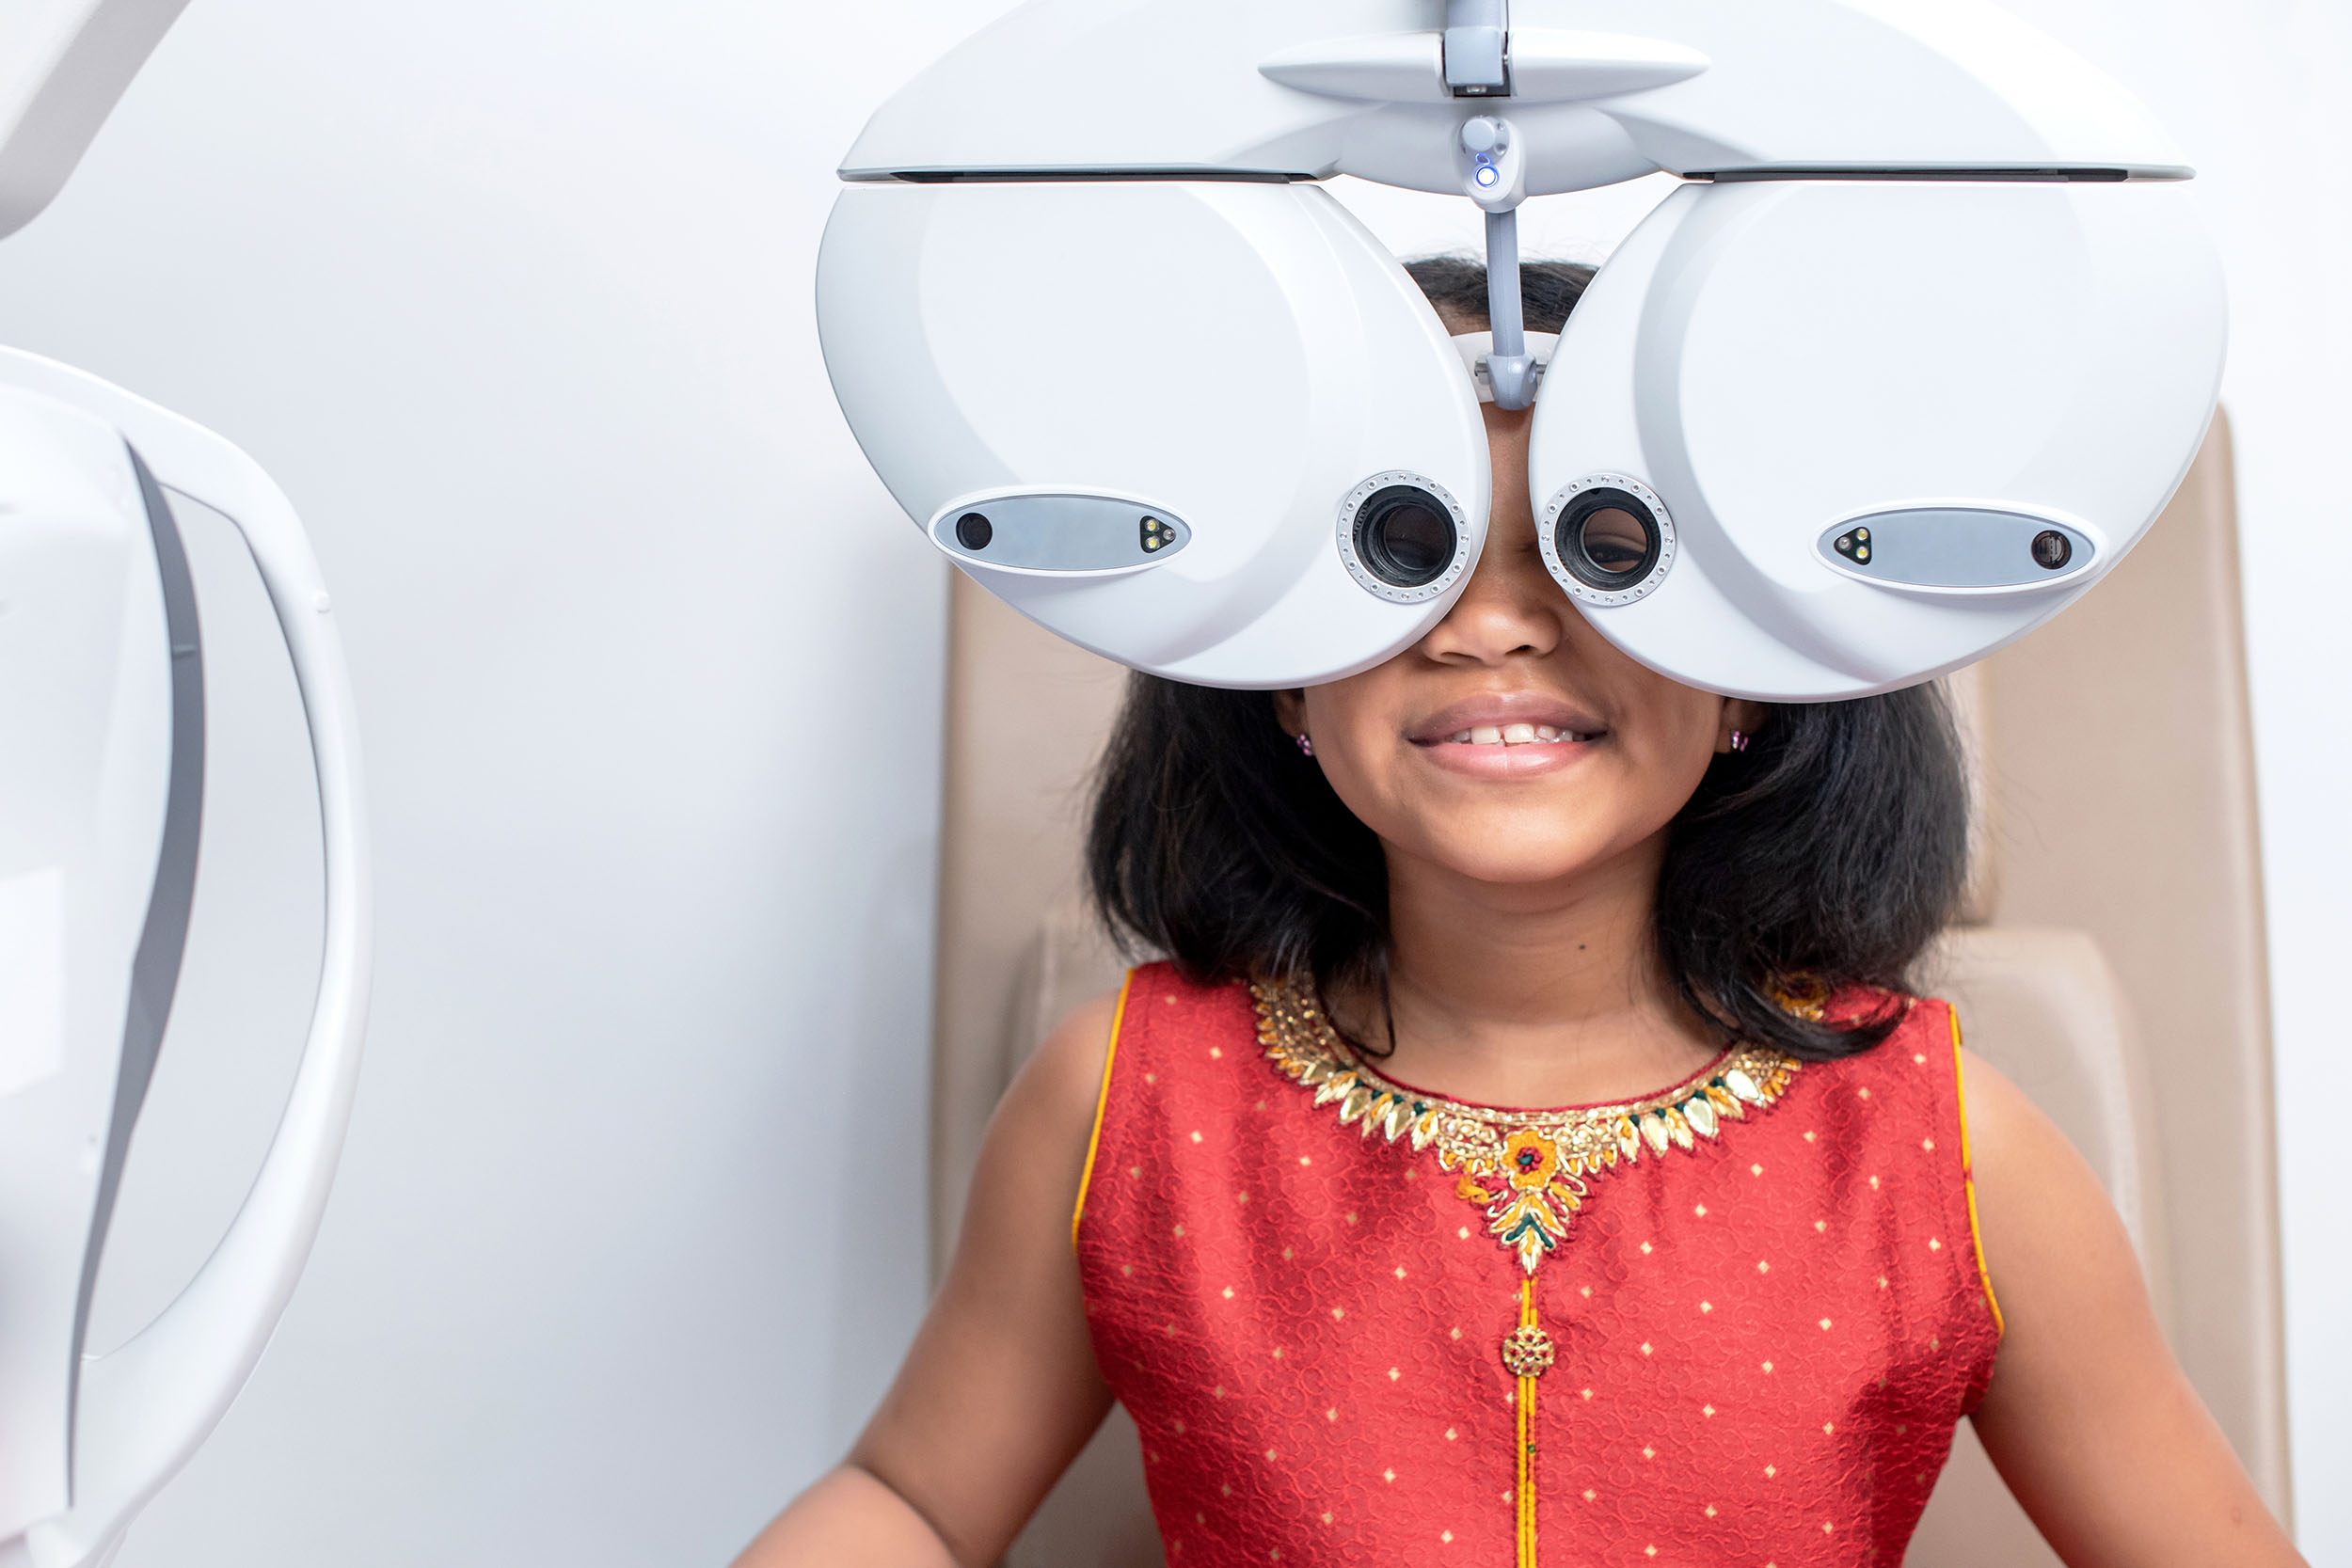 What to expect in your young child's first eye exam